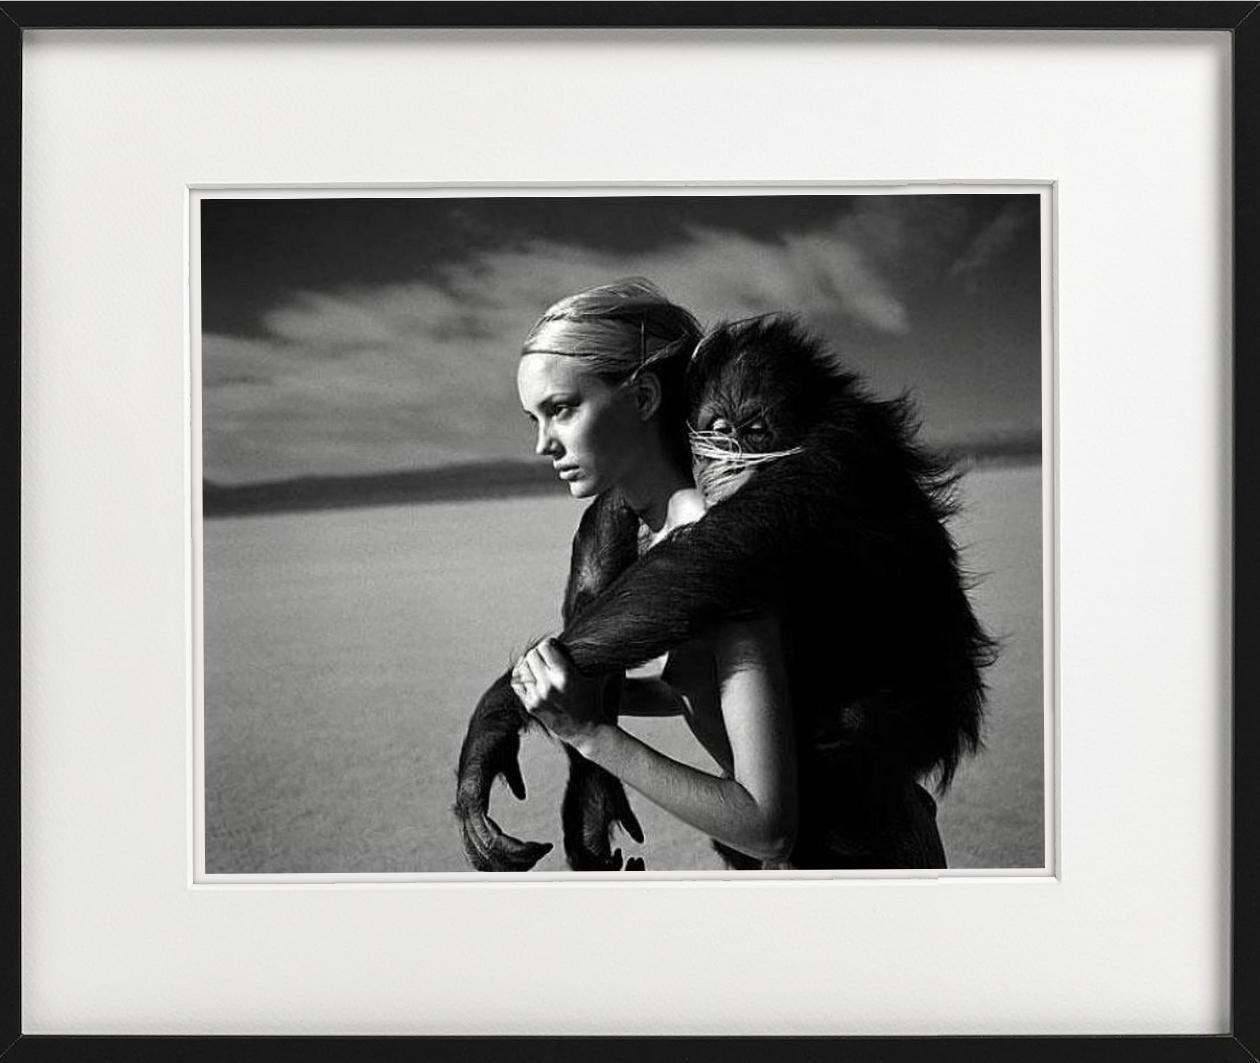 Beauty and Beast I - nude in the desert with monkey, fine art photography, 1996 - Gray Black and White Photograph by Michel Comte